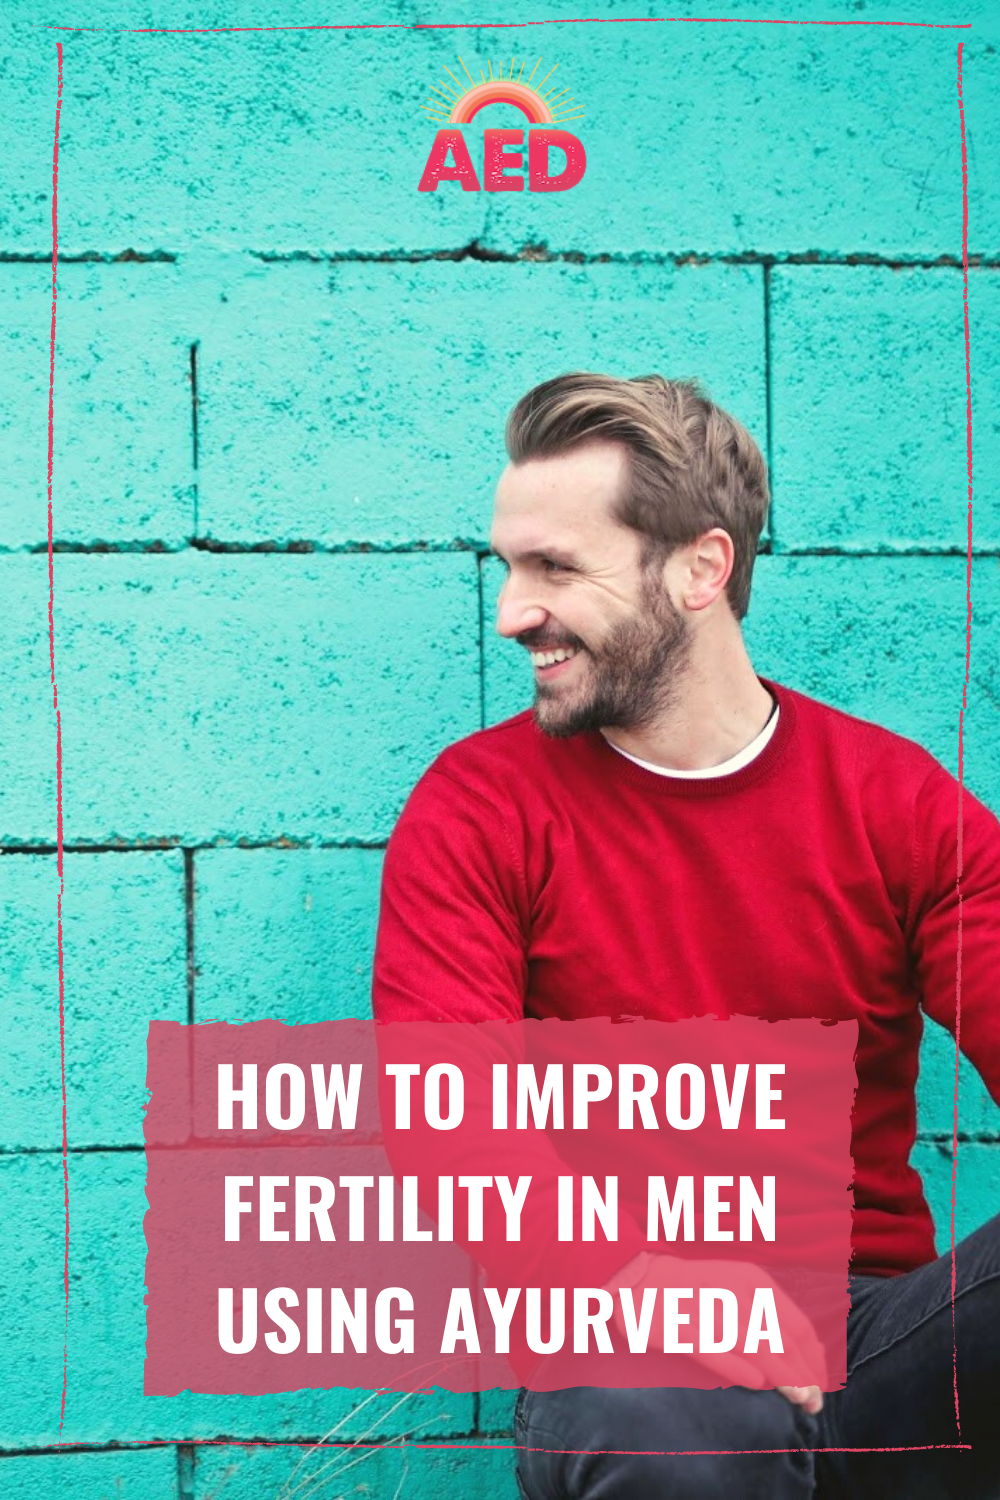 How to Improve Fertility in Men Using Ayurveda